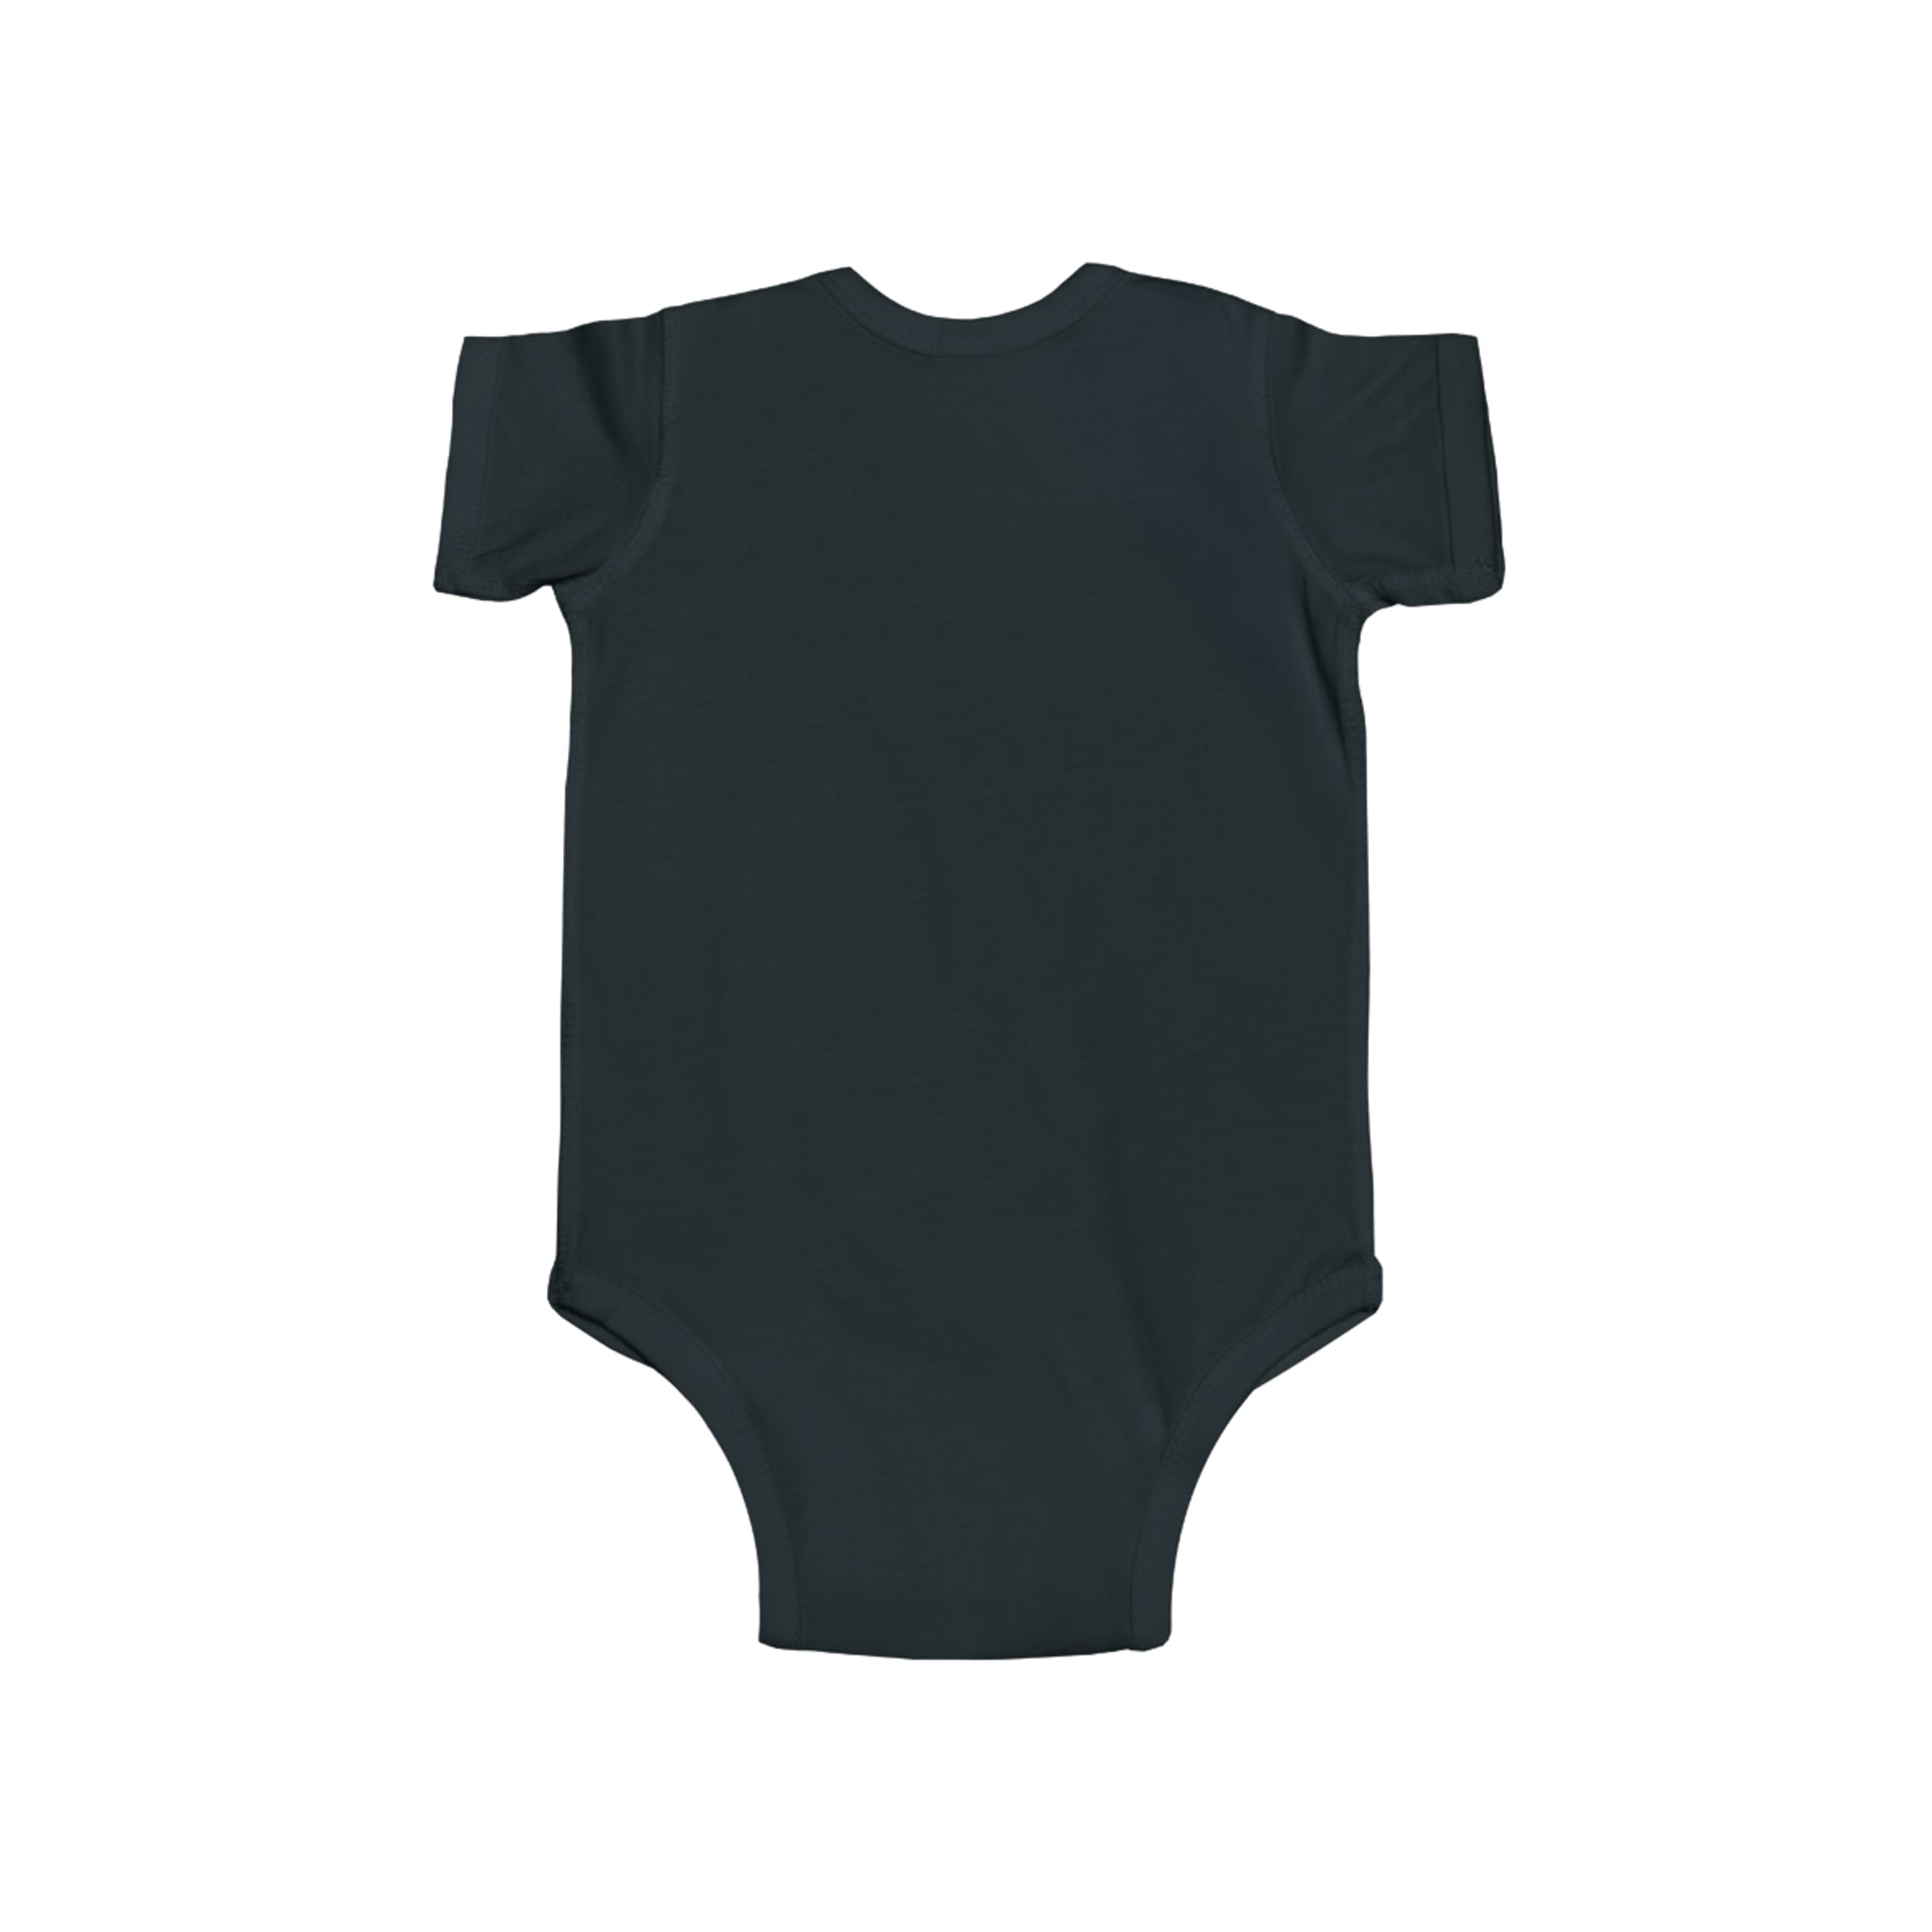 We Are Family Infant Fine Jersey Bodysuit